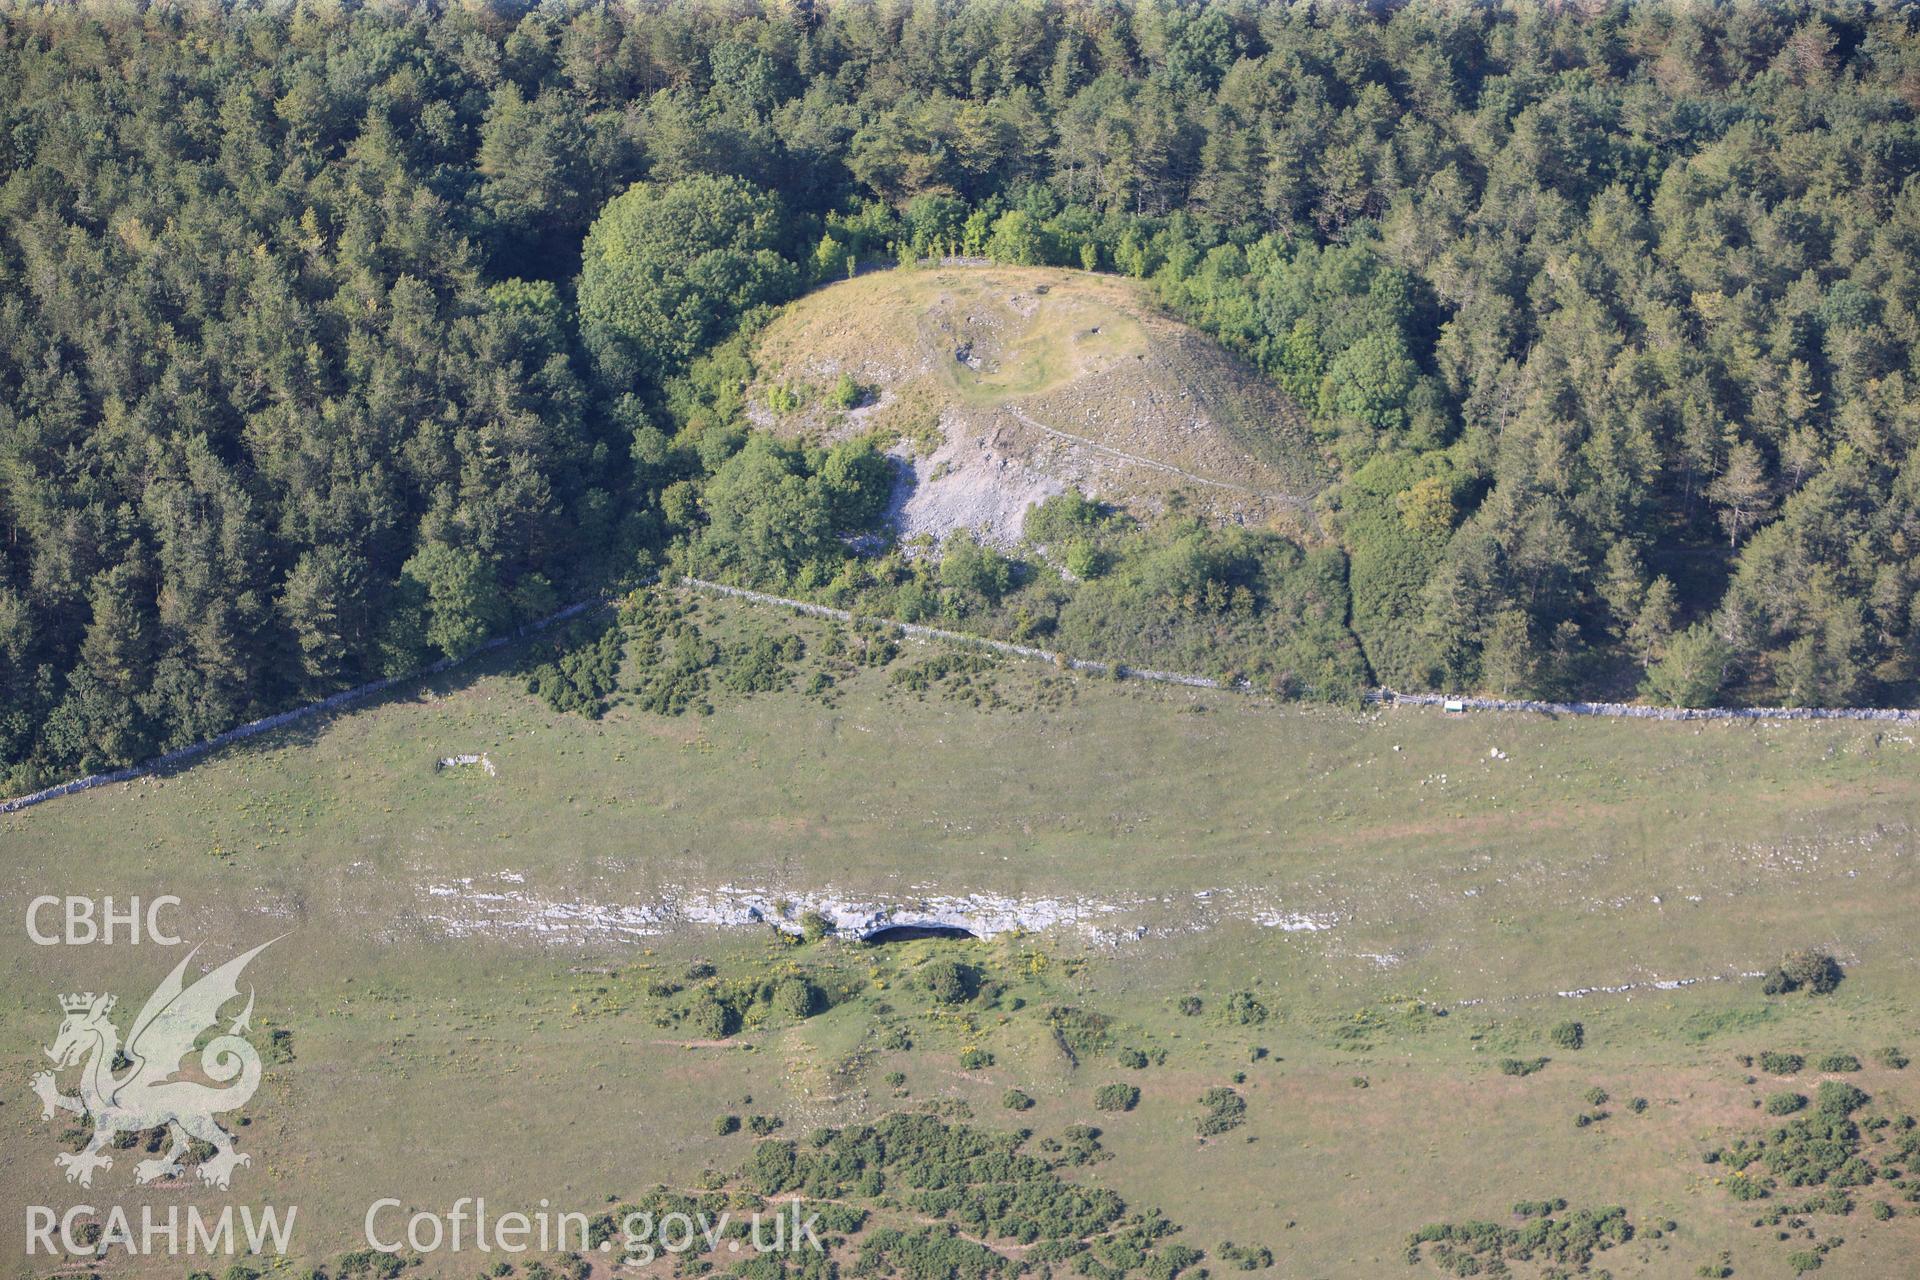 RCAHMW colour oblique photograph of Gop Cairn. Taken by Toby Driver and Oliver Davies on 27/07/2011.